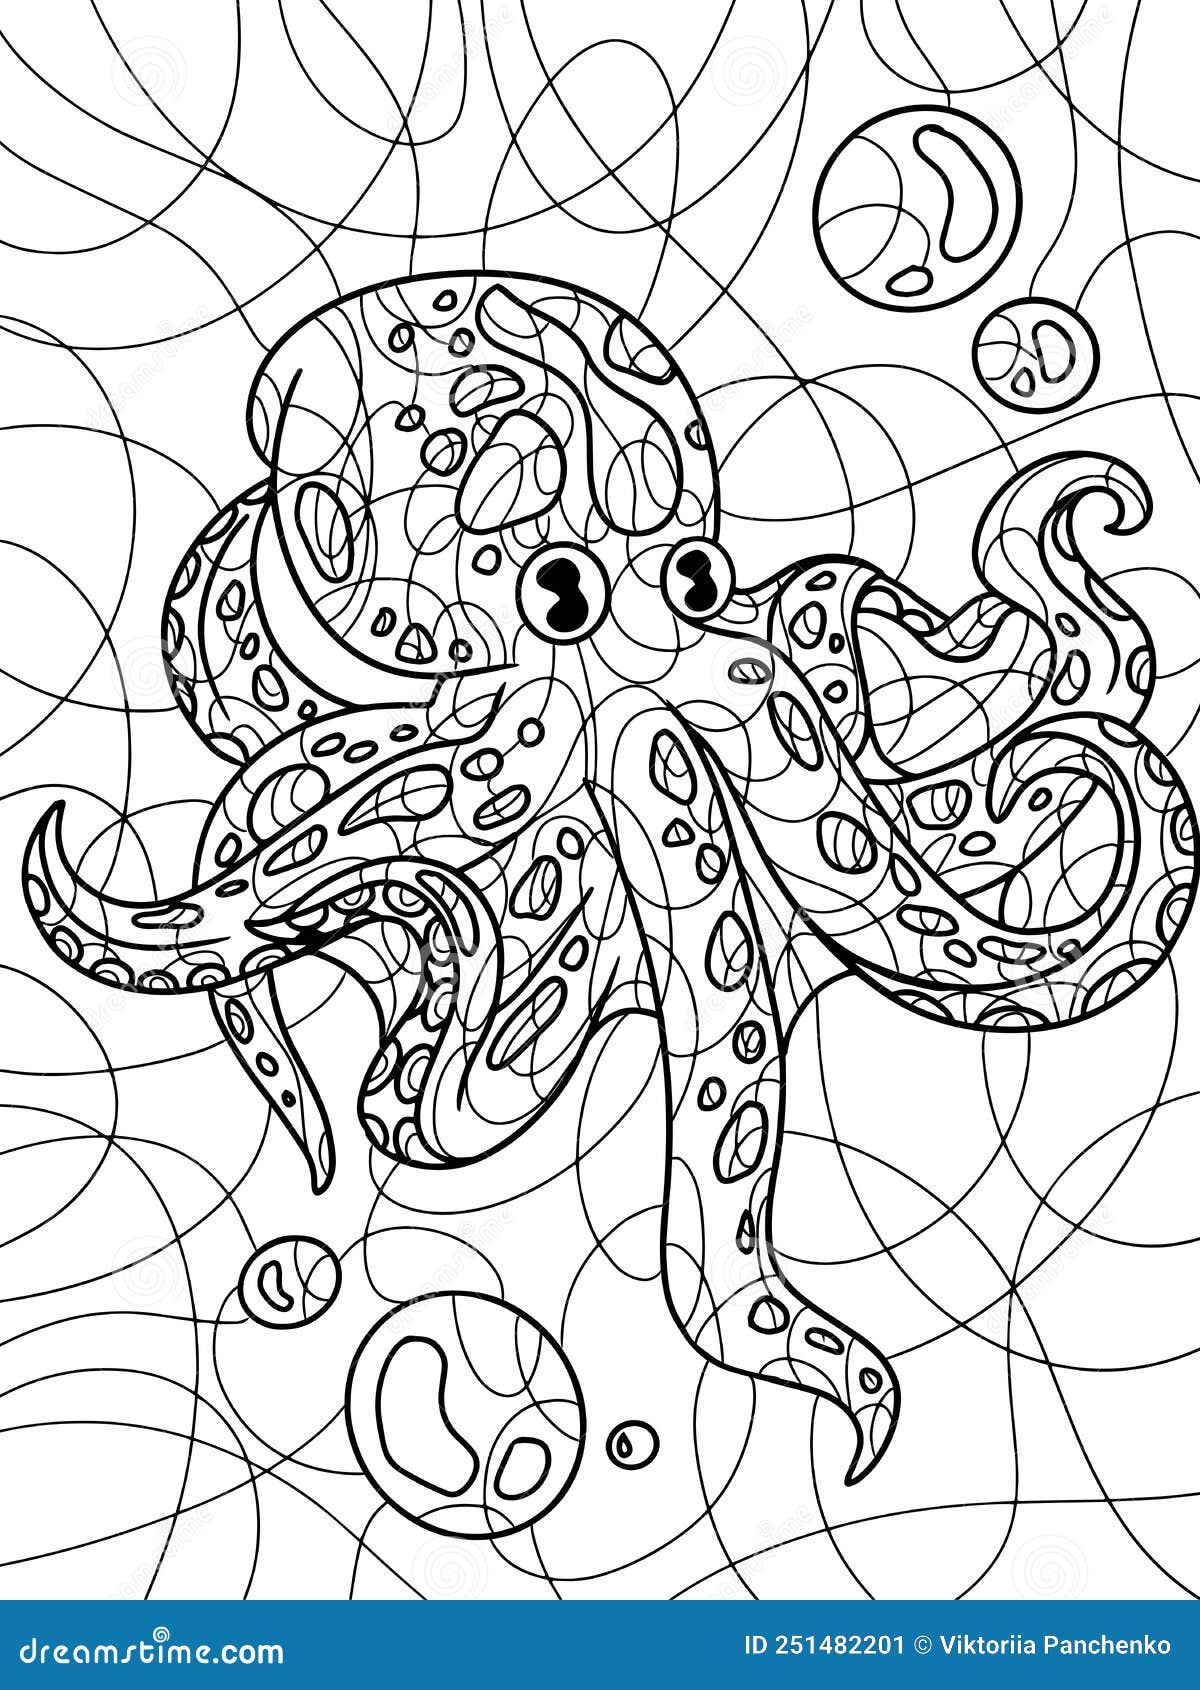 Sea Animal. Isolated Octopus with Air Bubbles. Page Outline of Cartoon ...